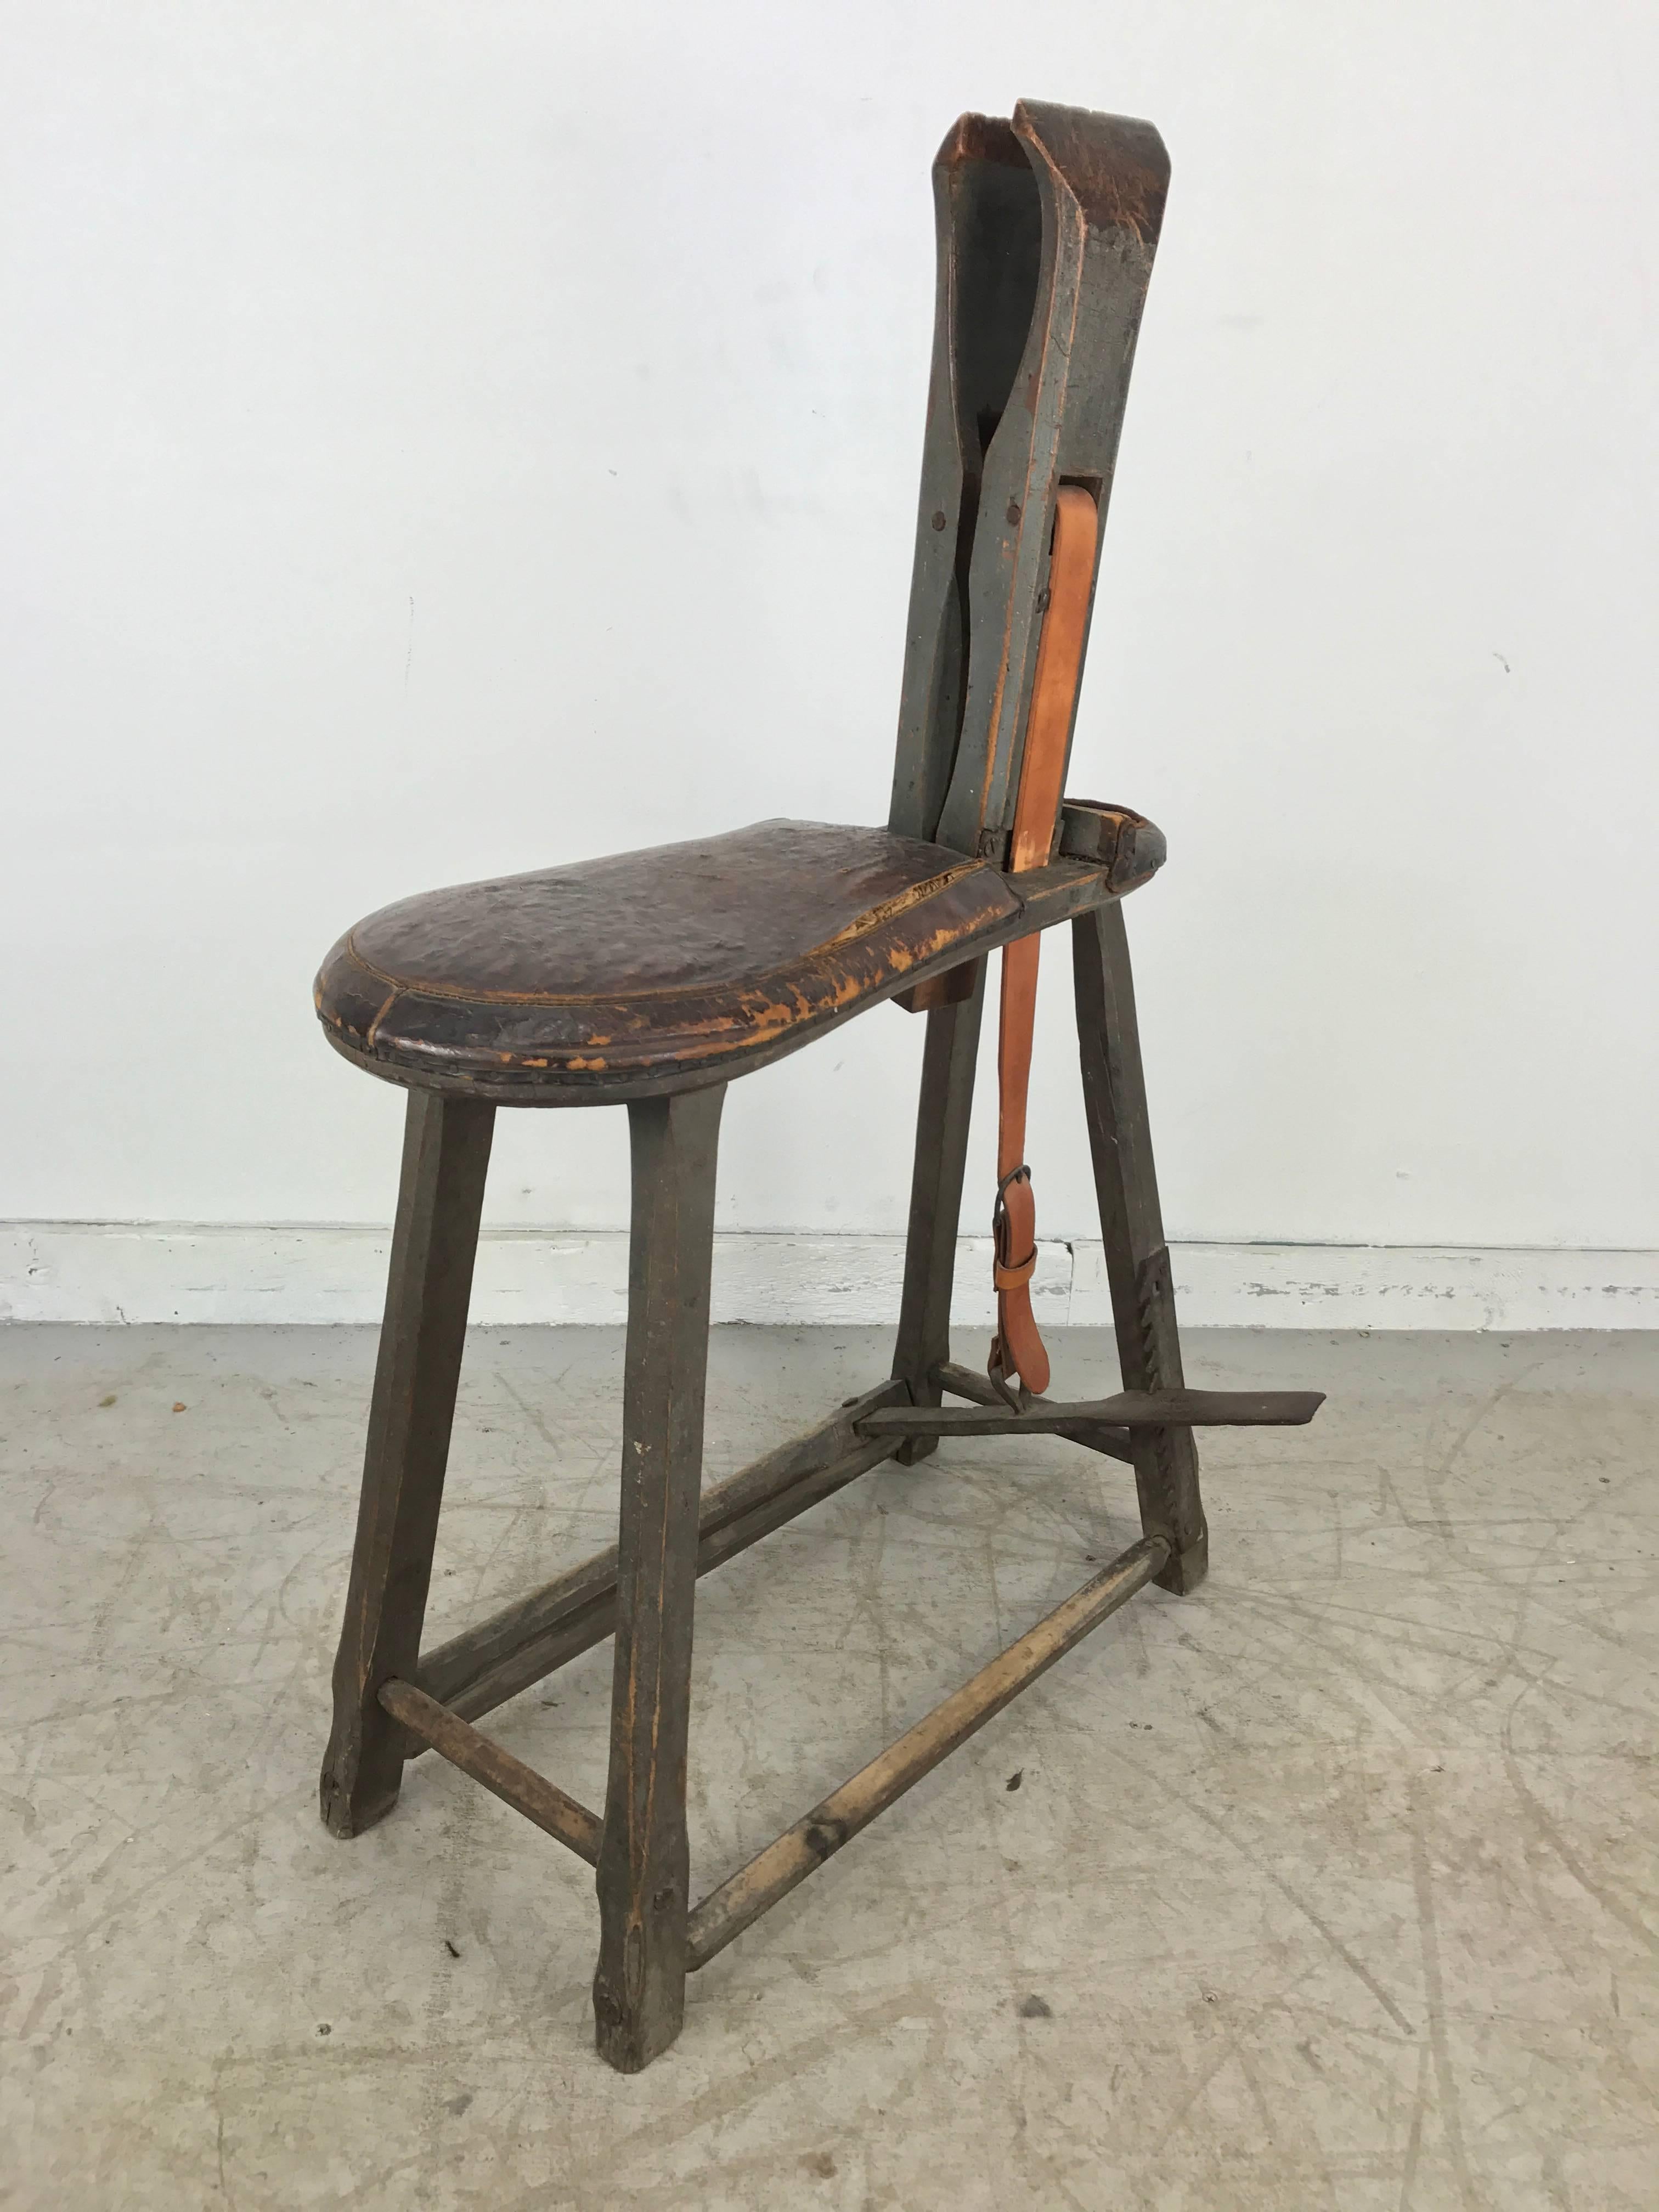 Antique Sculptural Harness repair Bench, circa 1840s. Whimsical little item, modern sculpture. Nice original paint, surface and color retains original leather seat.